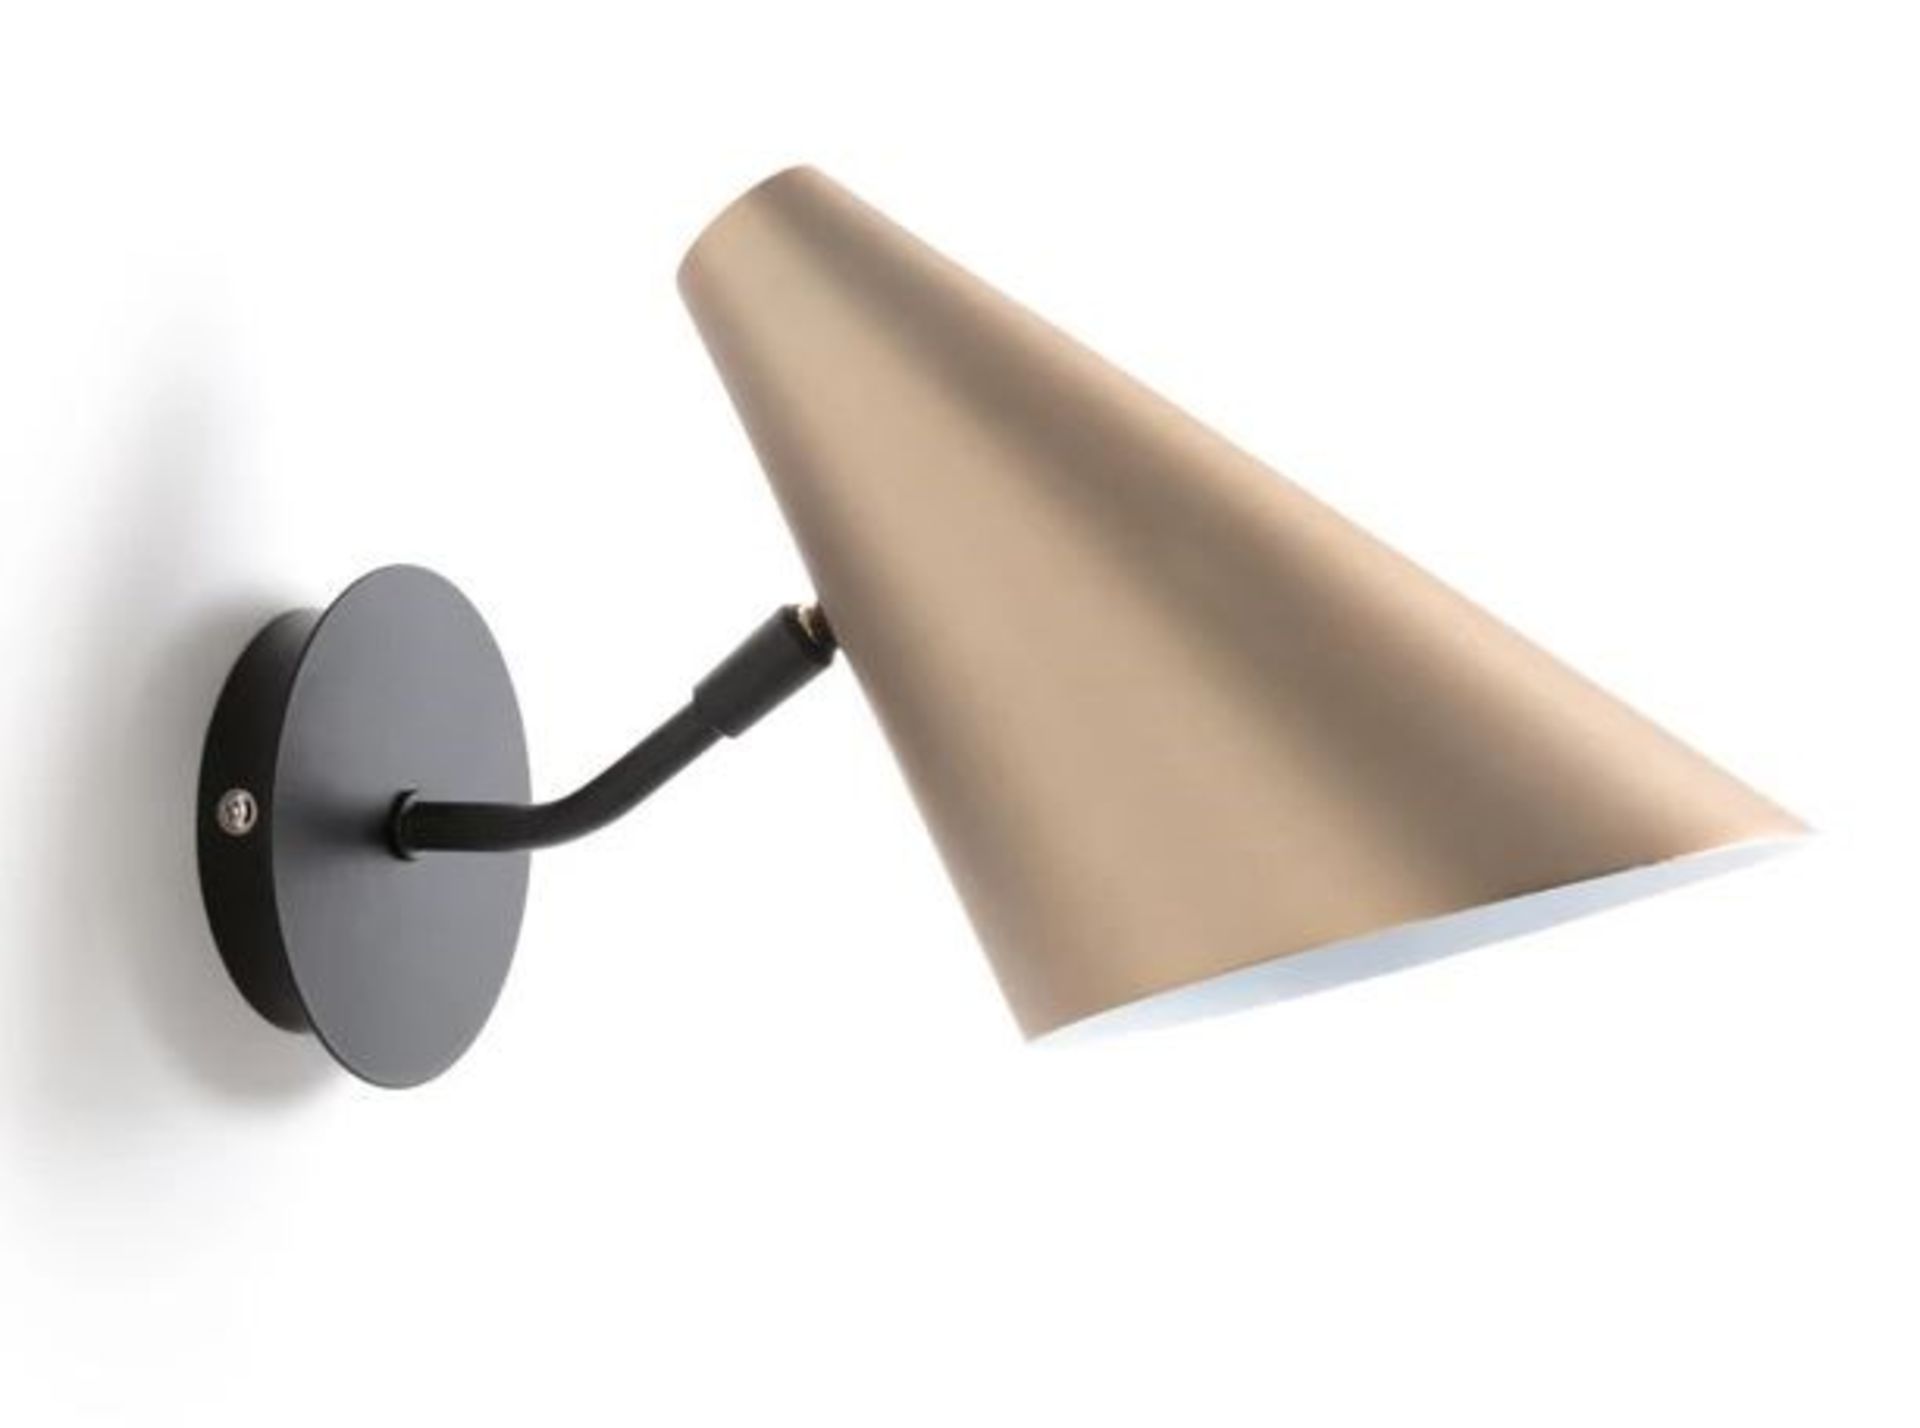 1 BOXED AM.PM BAREA CONTEMPORARY METALLIC WALL LIGHT IN MOCHA - LIGHT BULB NOT INCLUDED / RRP £80.00